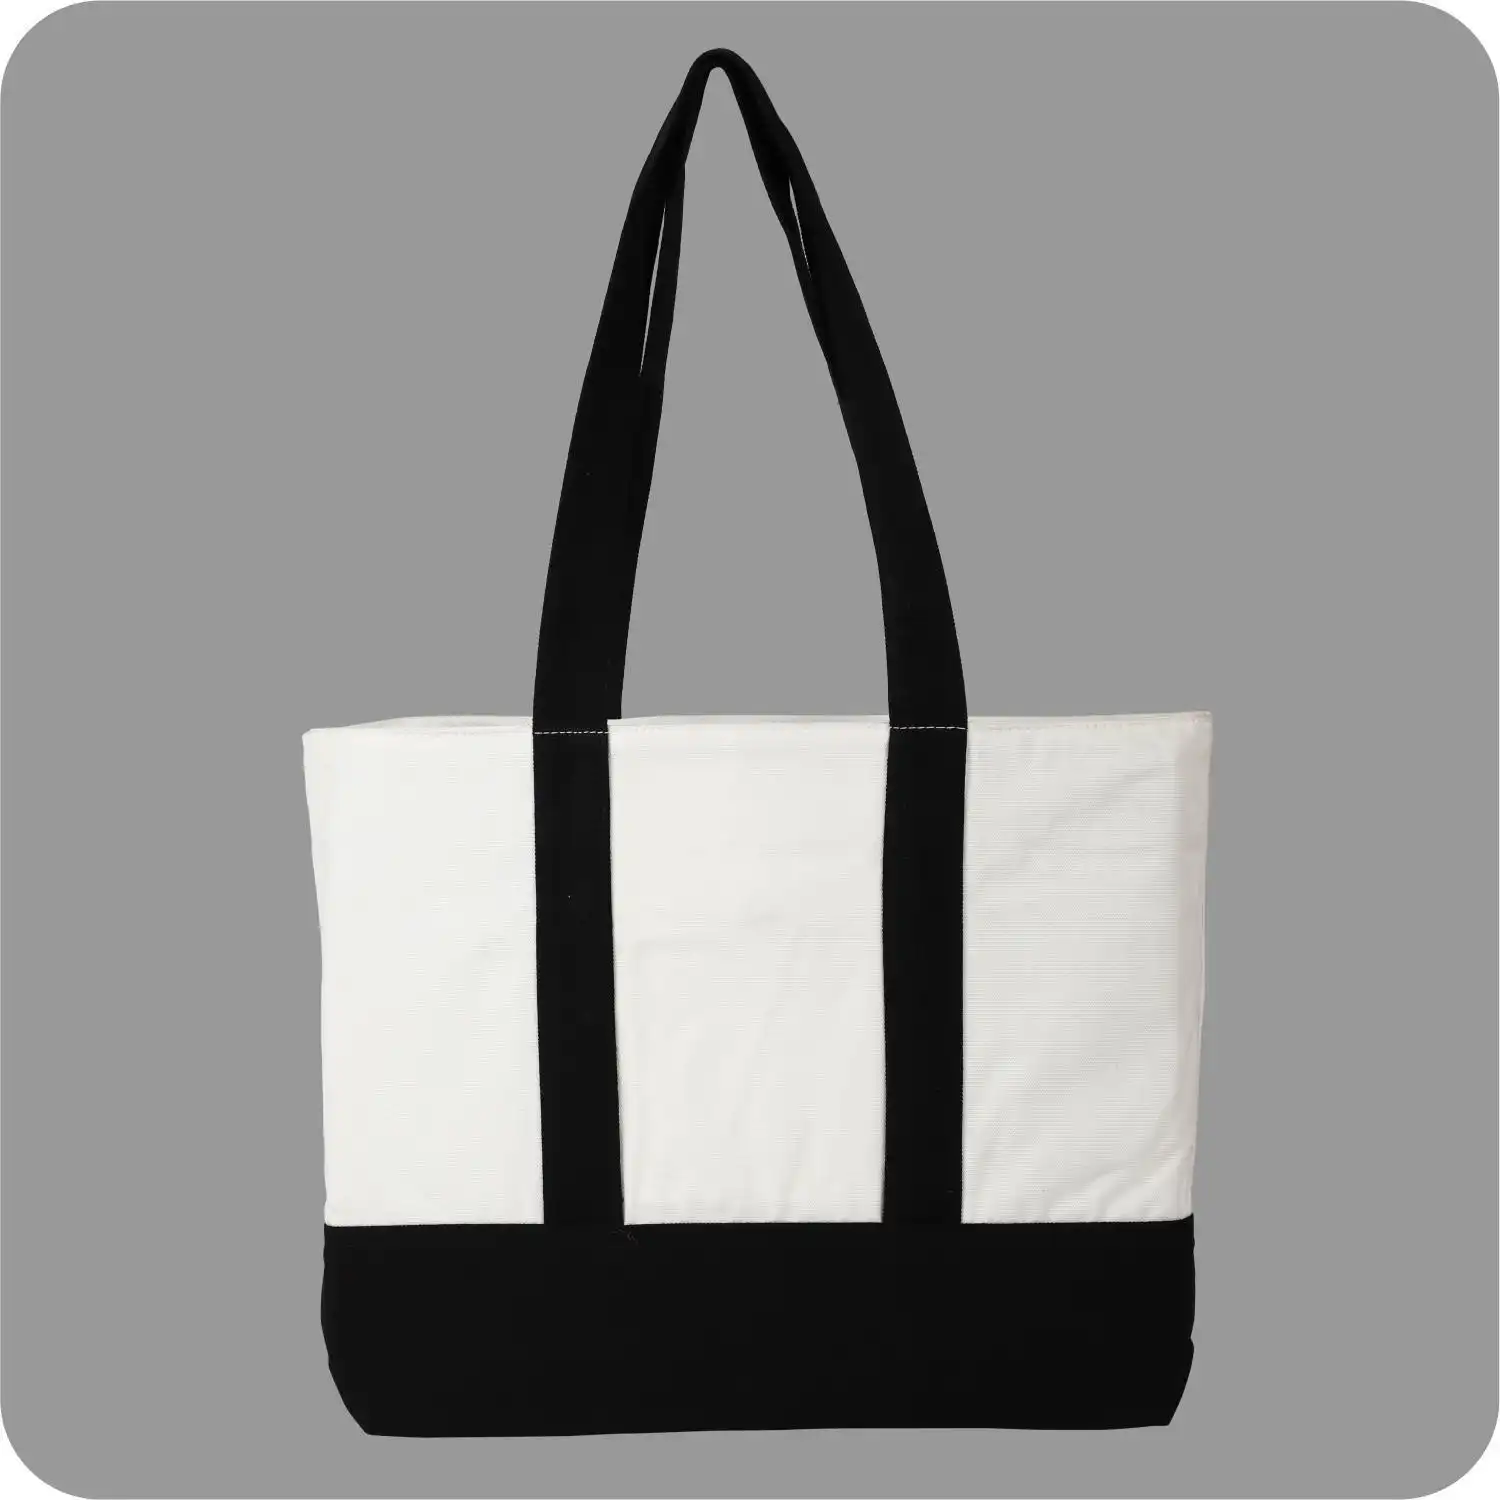 Trendy and Consistent, Heavily Loaded Canvas Bags